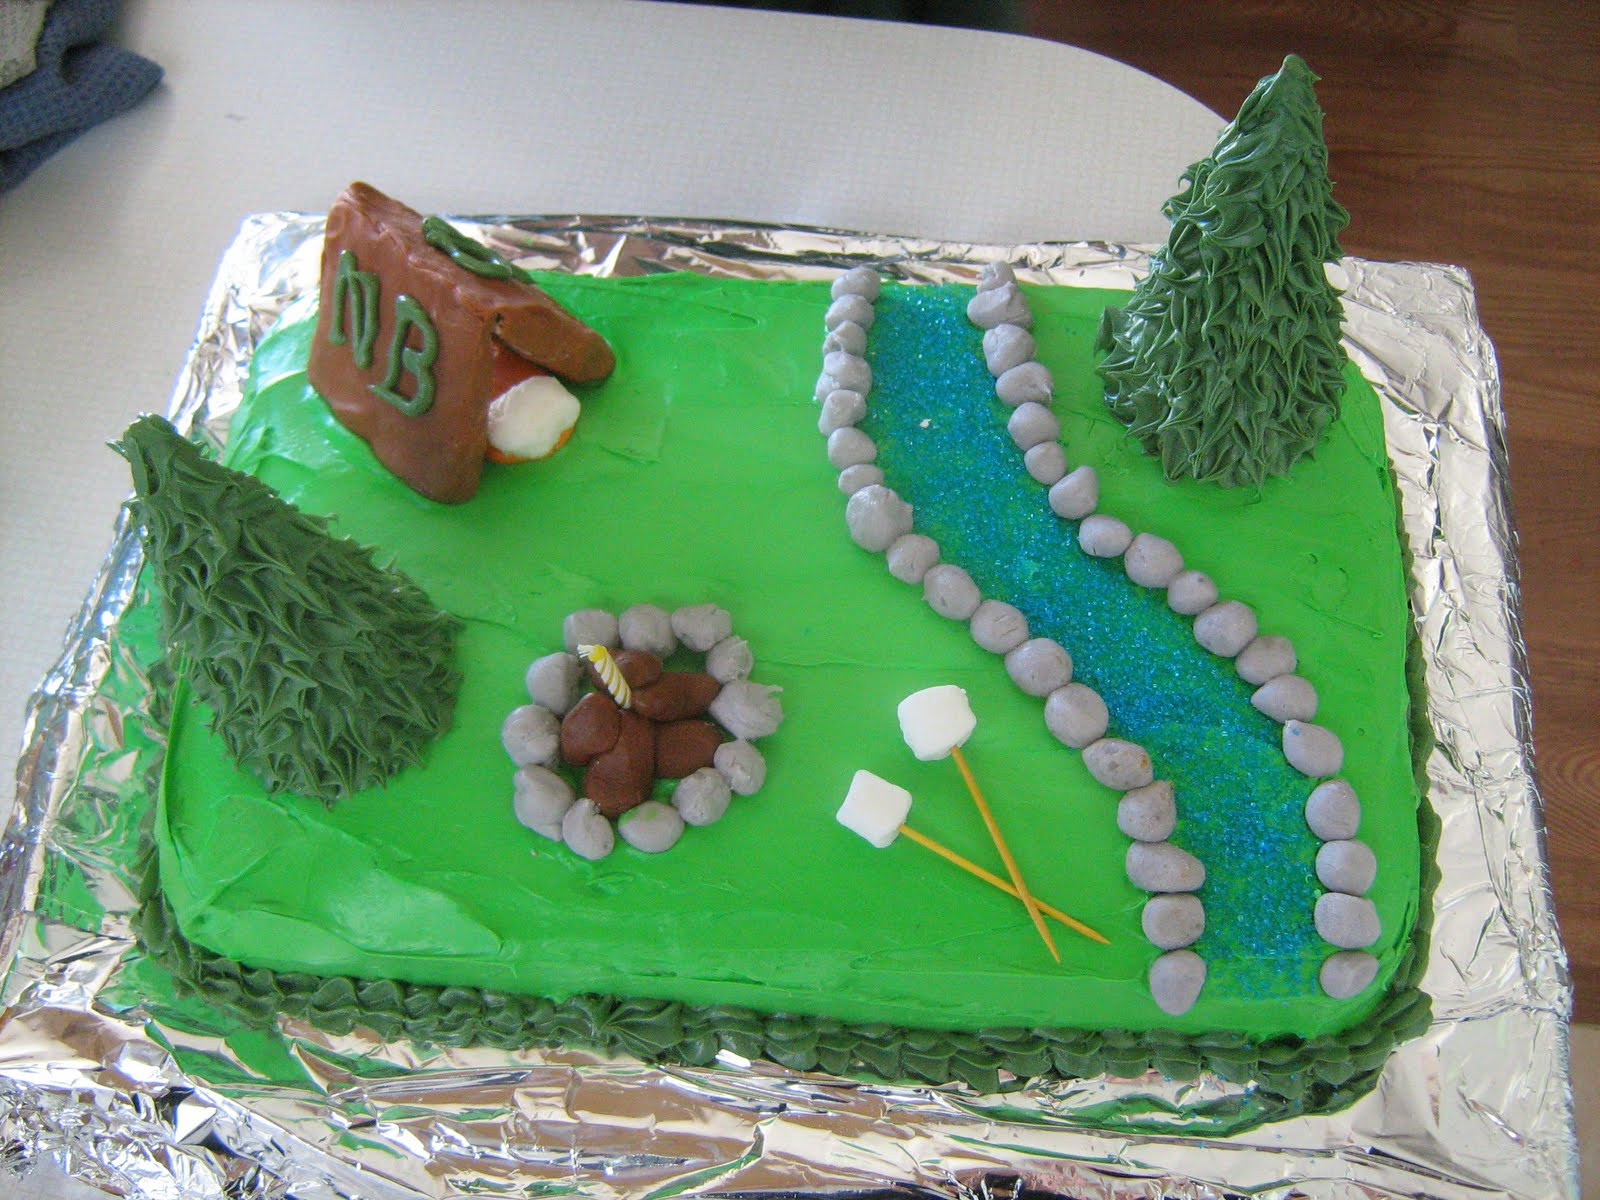 Camping Themed Birthday Cake
 Pin Camping Themed Cupcakes Crushed Oreos For Dirt